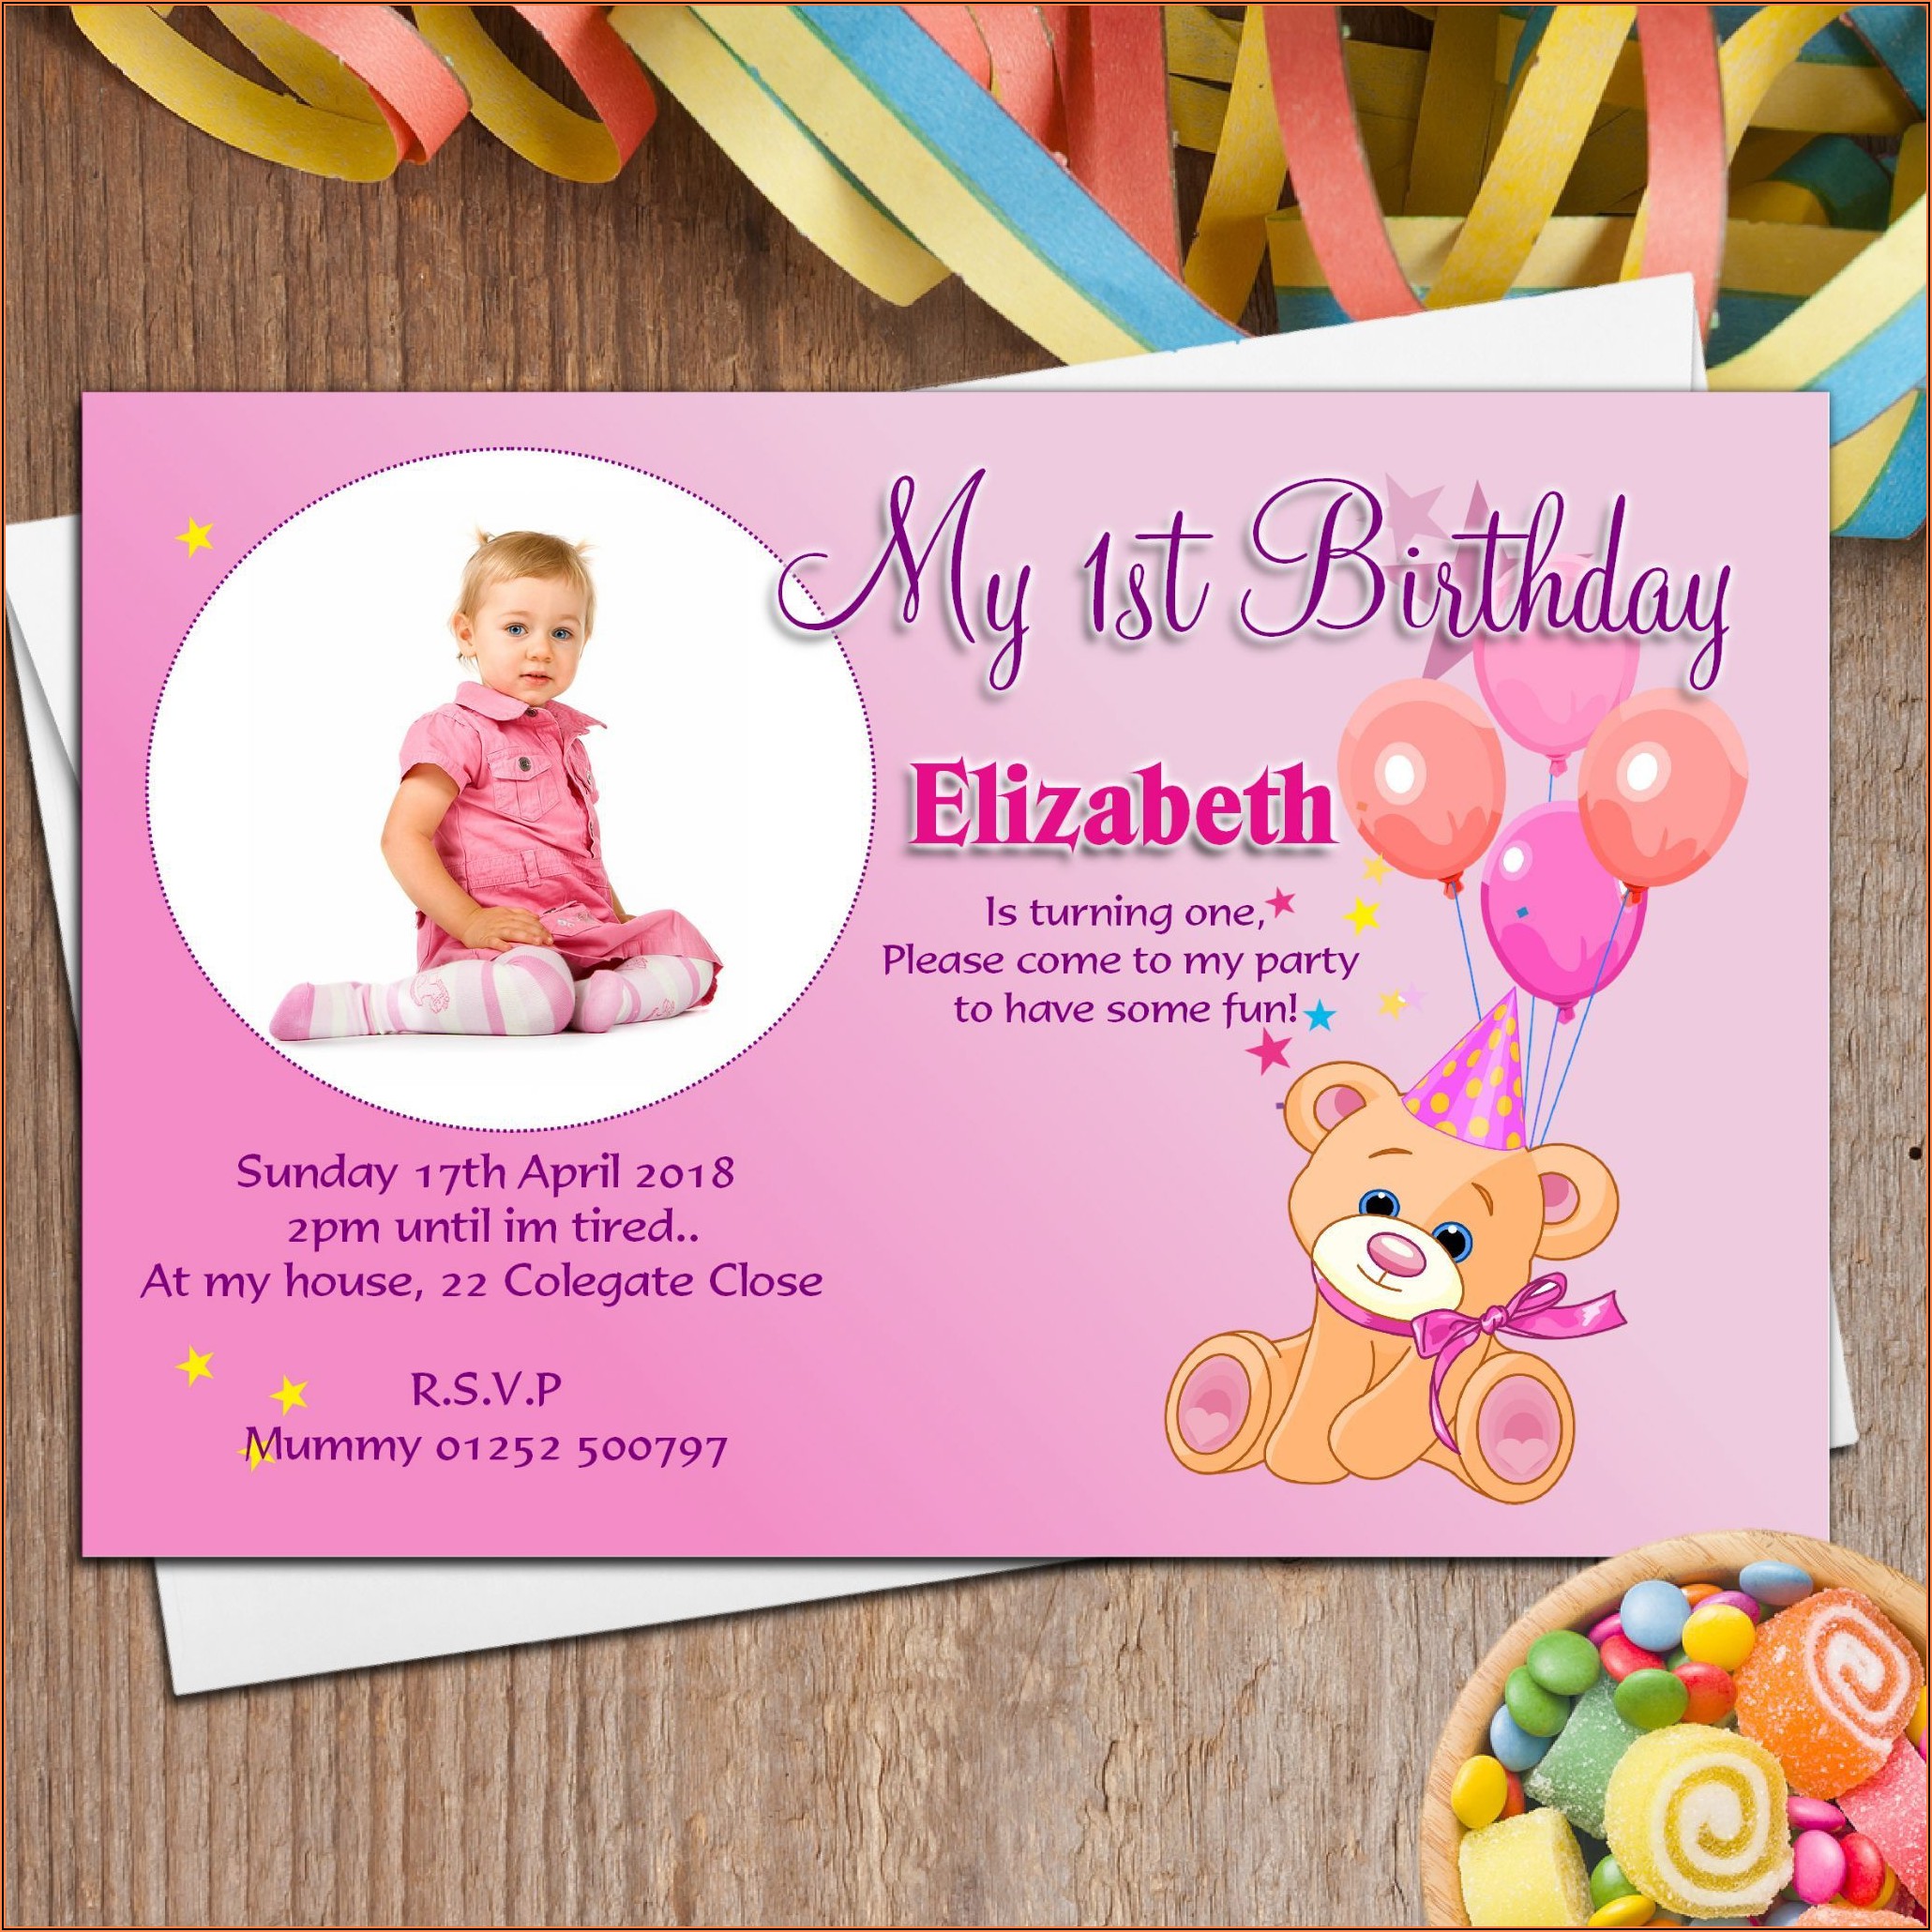 Invitation Card For 1st Birthday Party Of Baby Boy